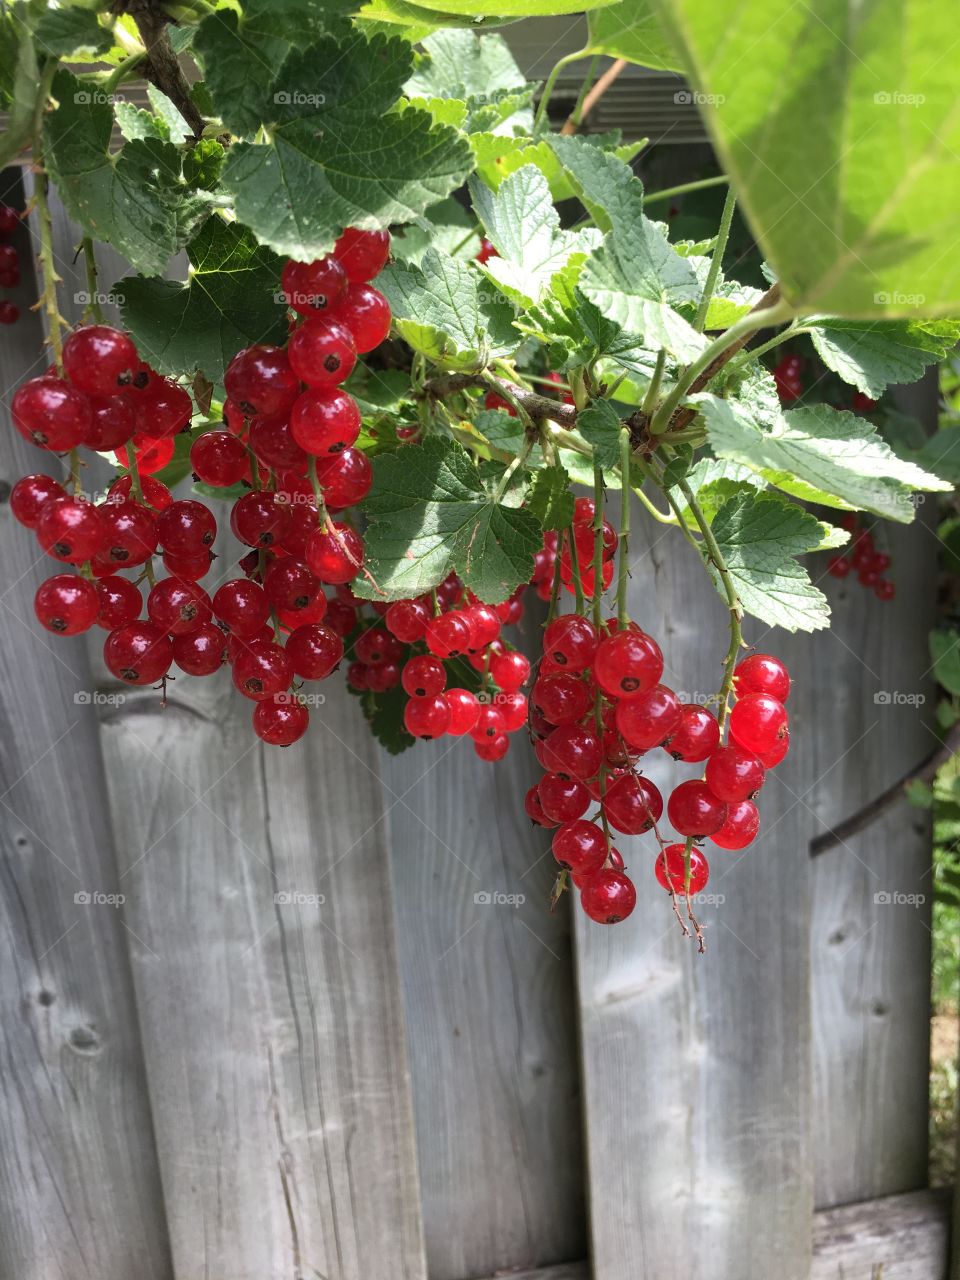 Wild red currants